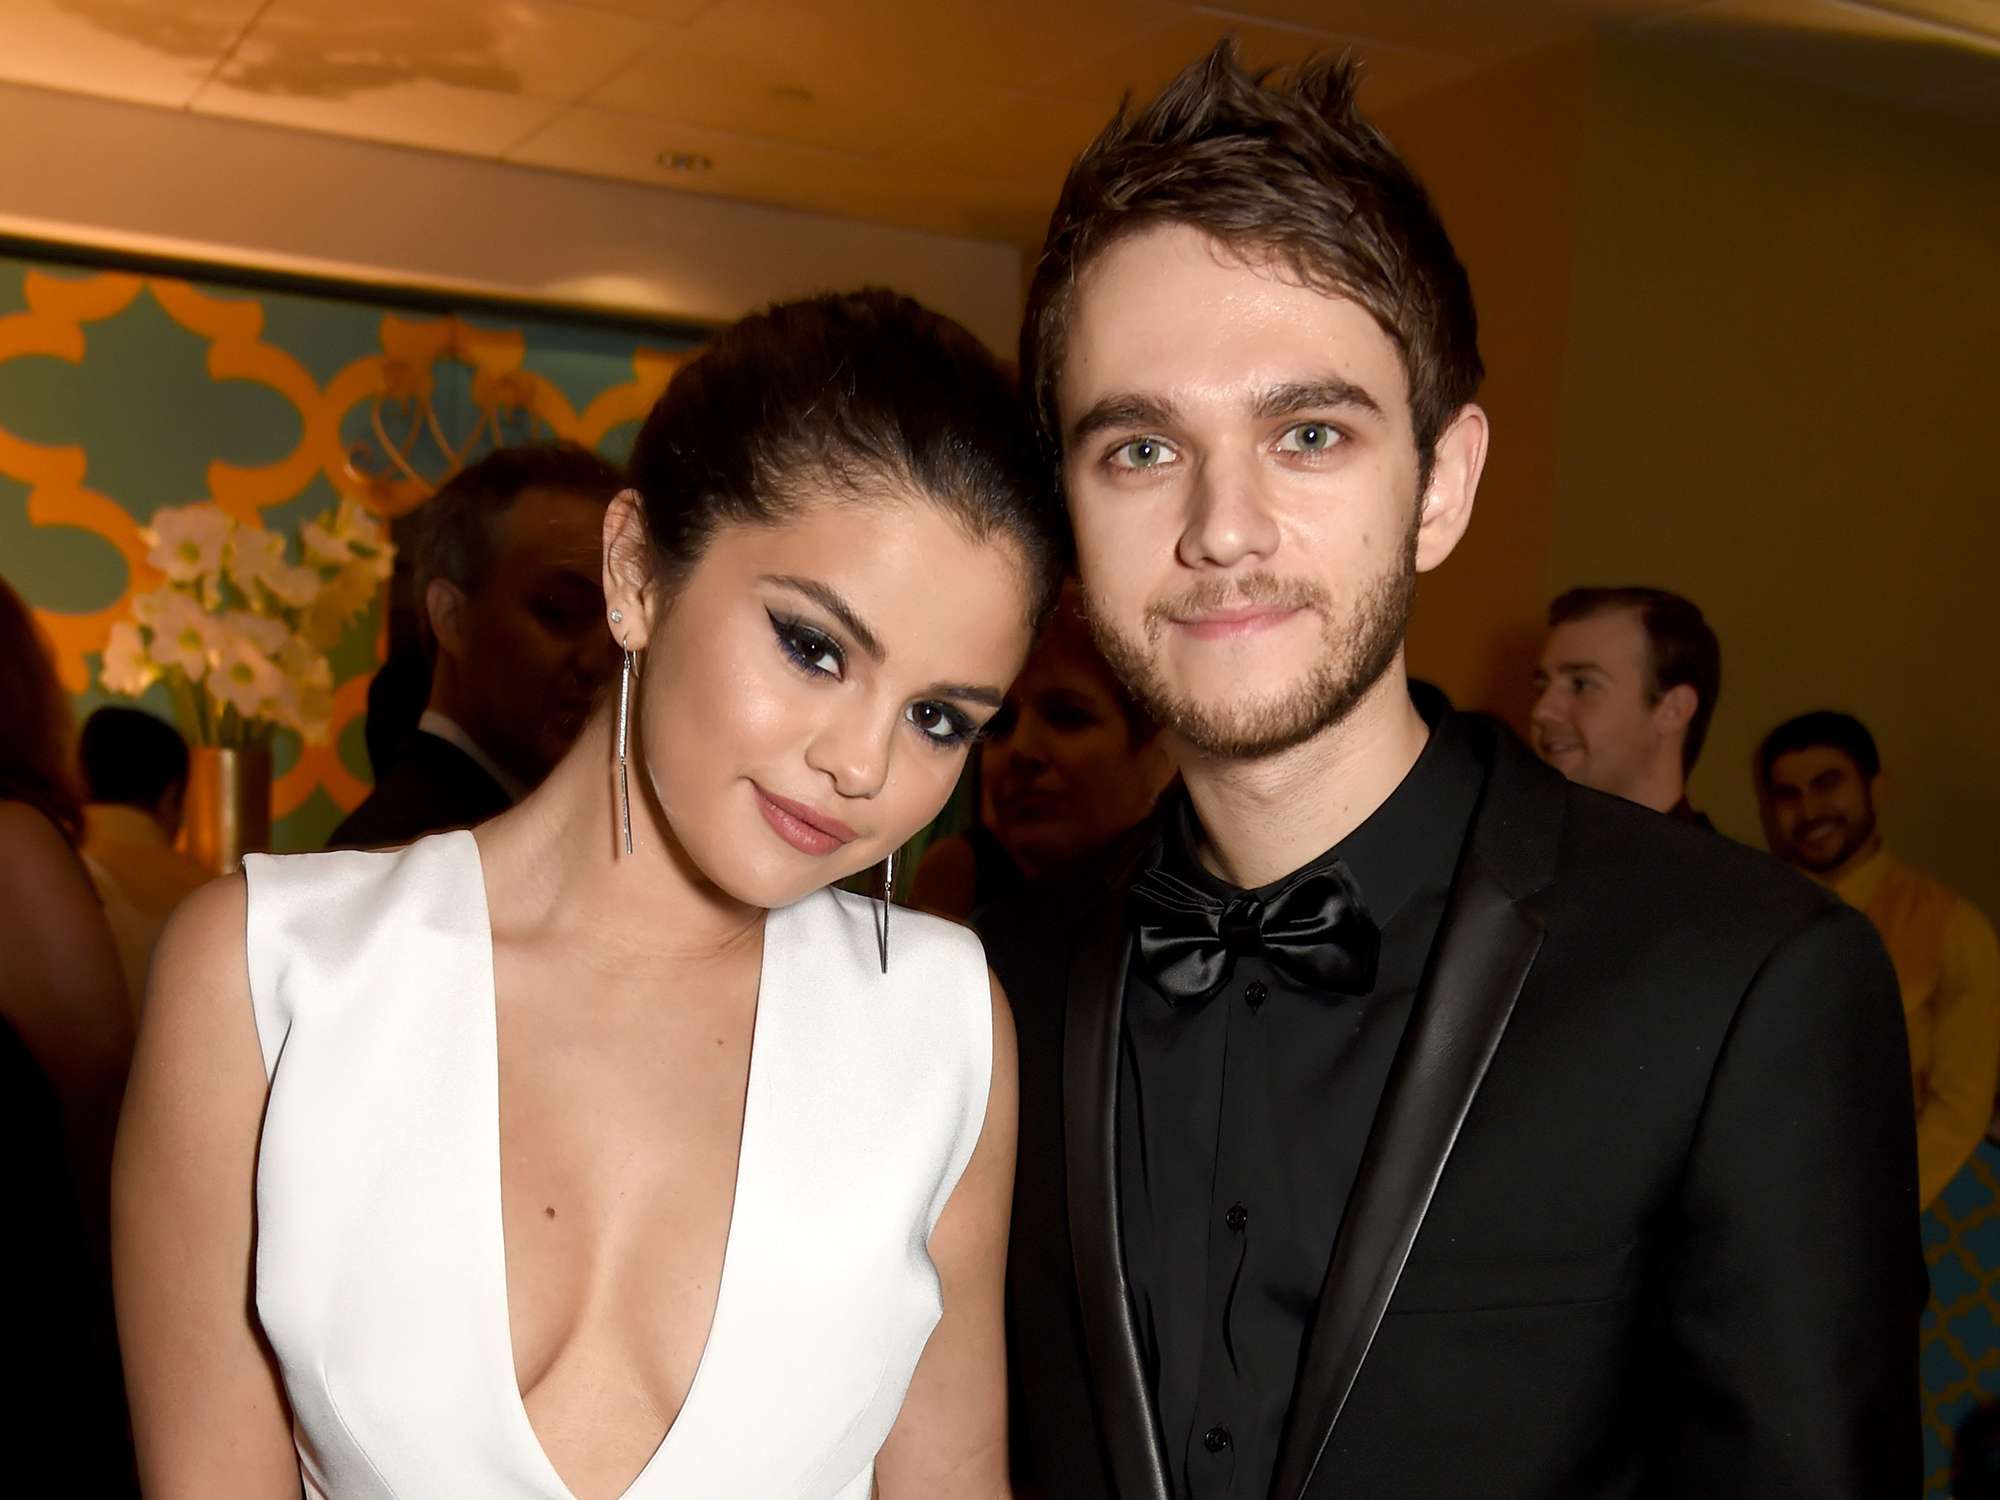 Selena Gomez (L) and musician Zedd attend HBO's Official Golden Globe Awards After Party at The Beverly Hilton Hotel on January 11, 2015 in Beverly Hills, California